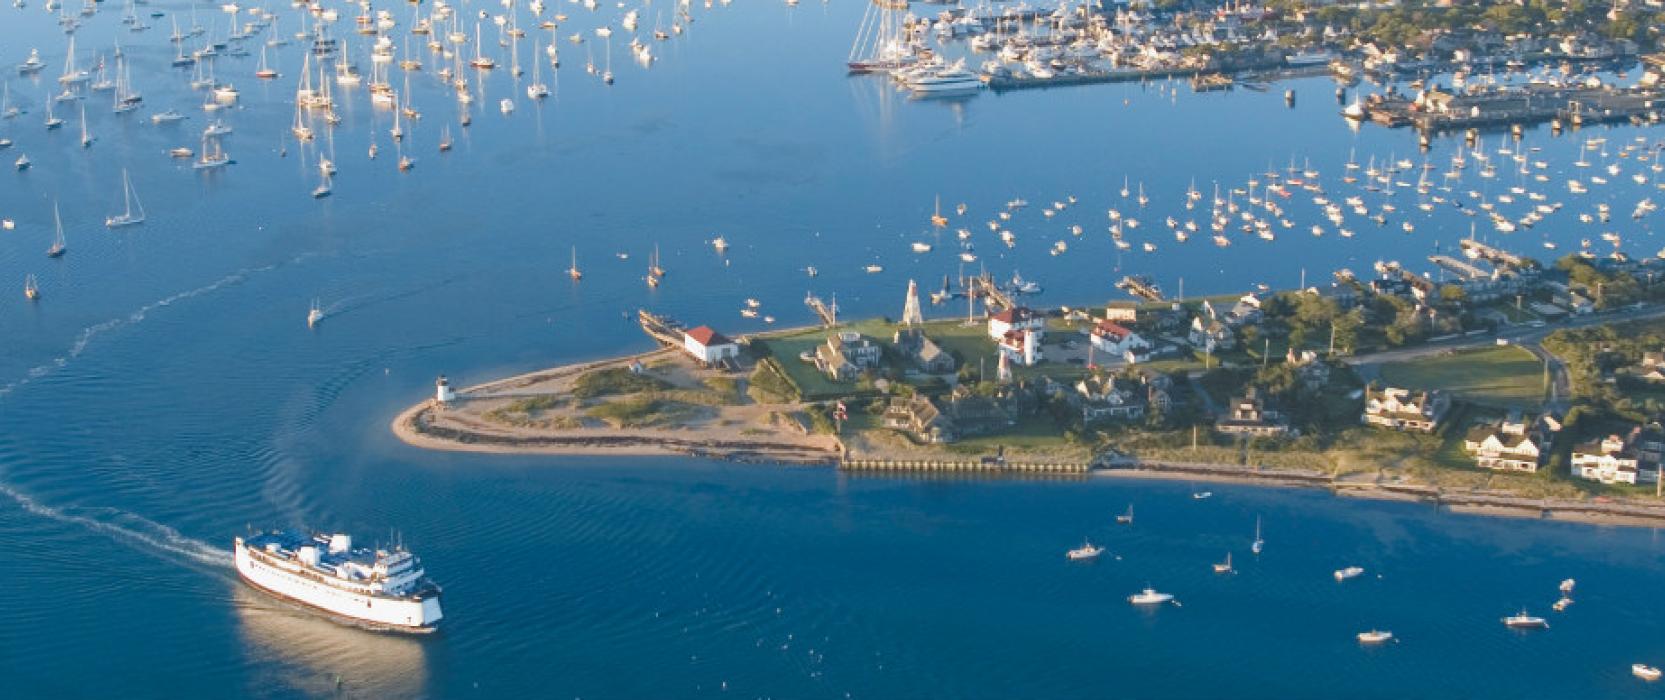 12 Things To Do in Nantucket